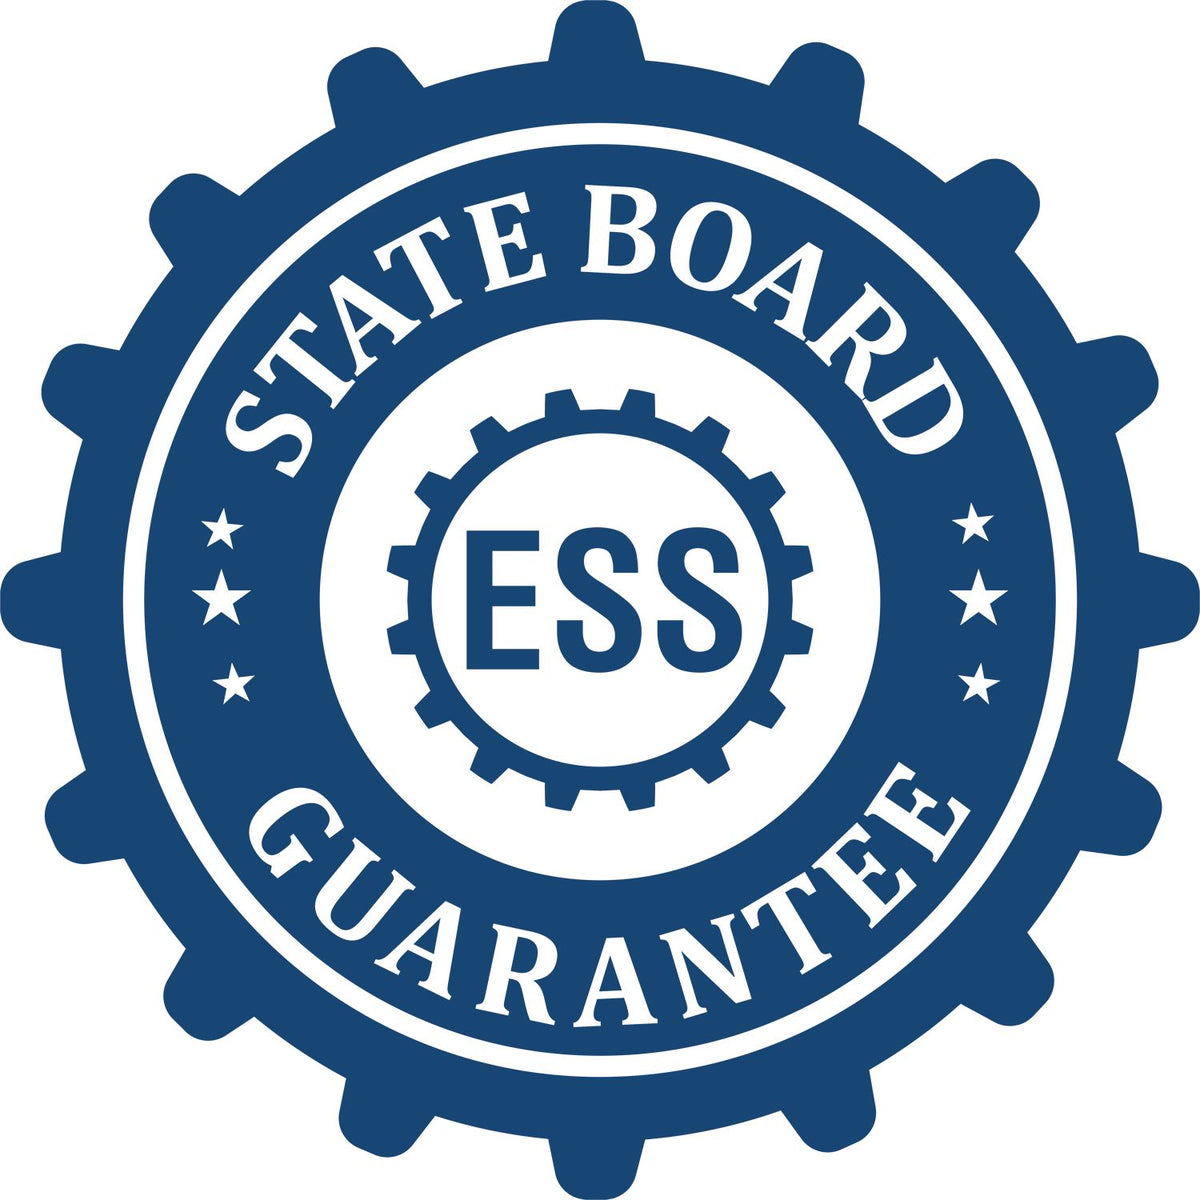 An emblem in a gear shape illustrating a state board guarantee for the Super Slim Vermont Notary Public Stamp product.